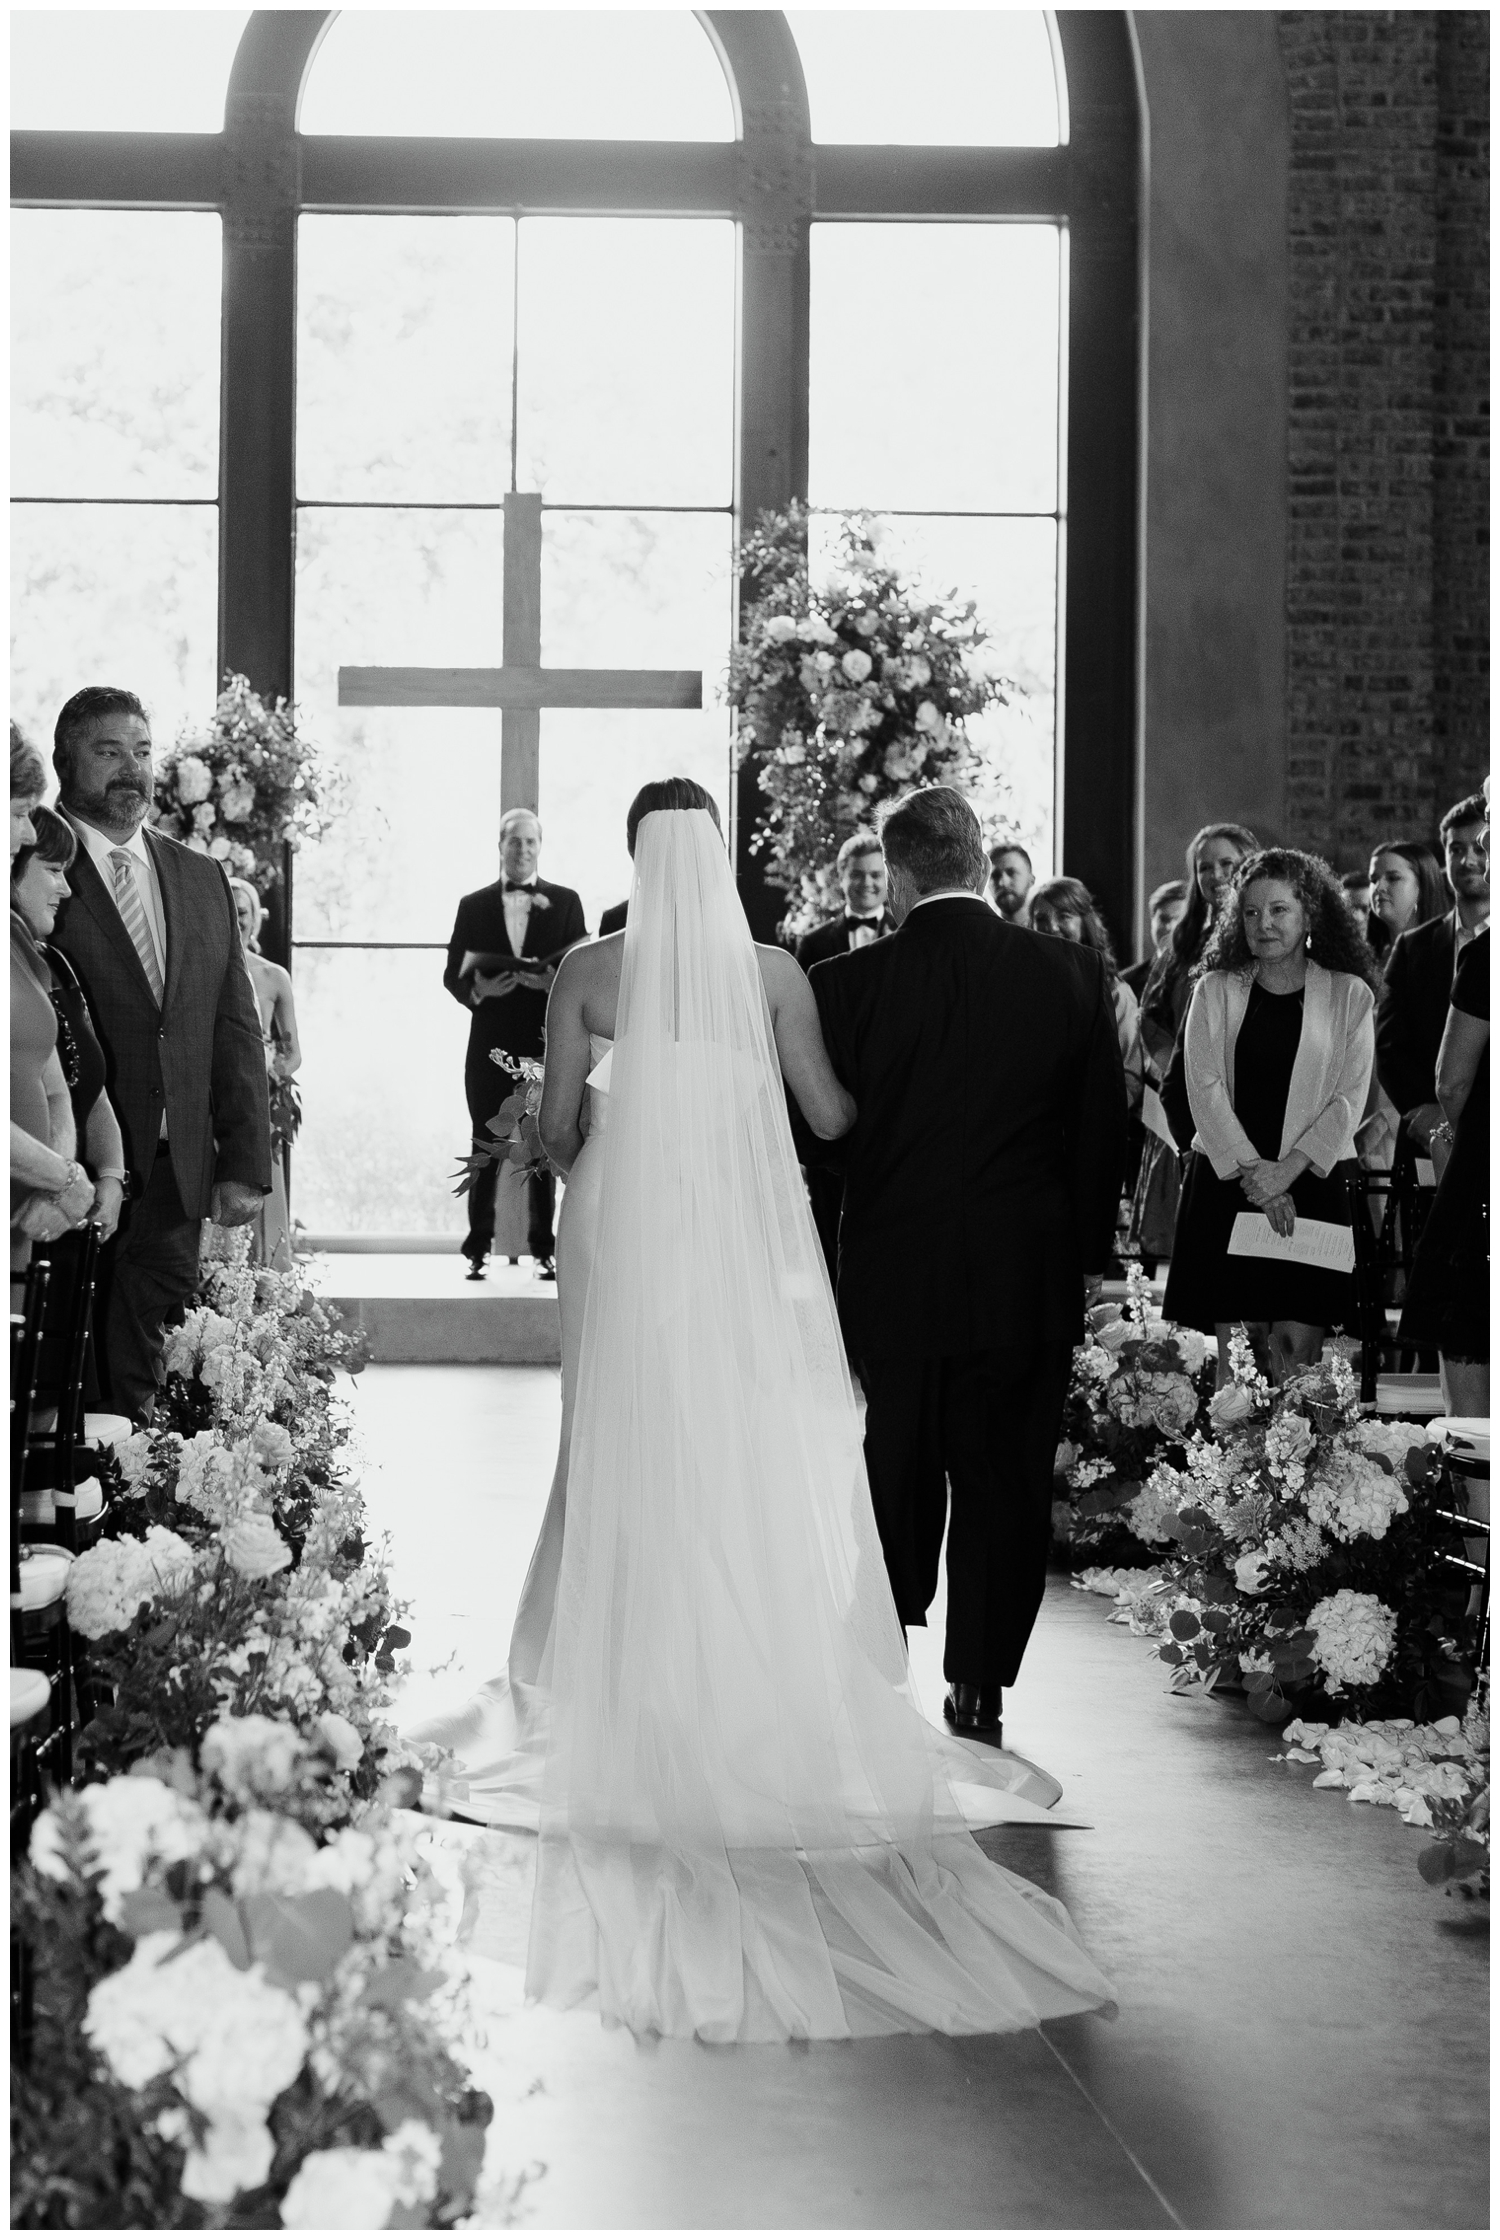 black and white image from behind of father and bride walking down Iron Manor ceremony aisle